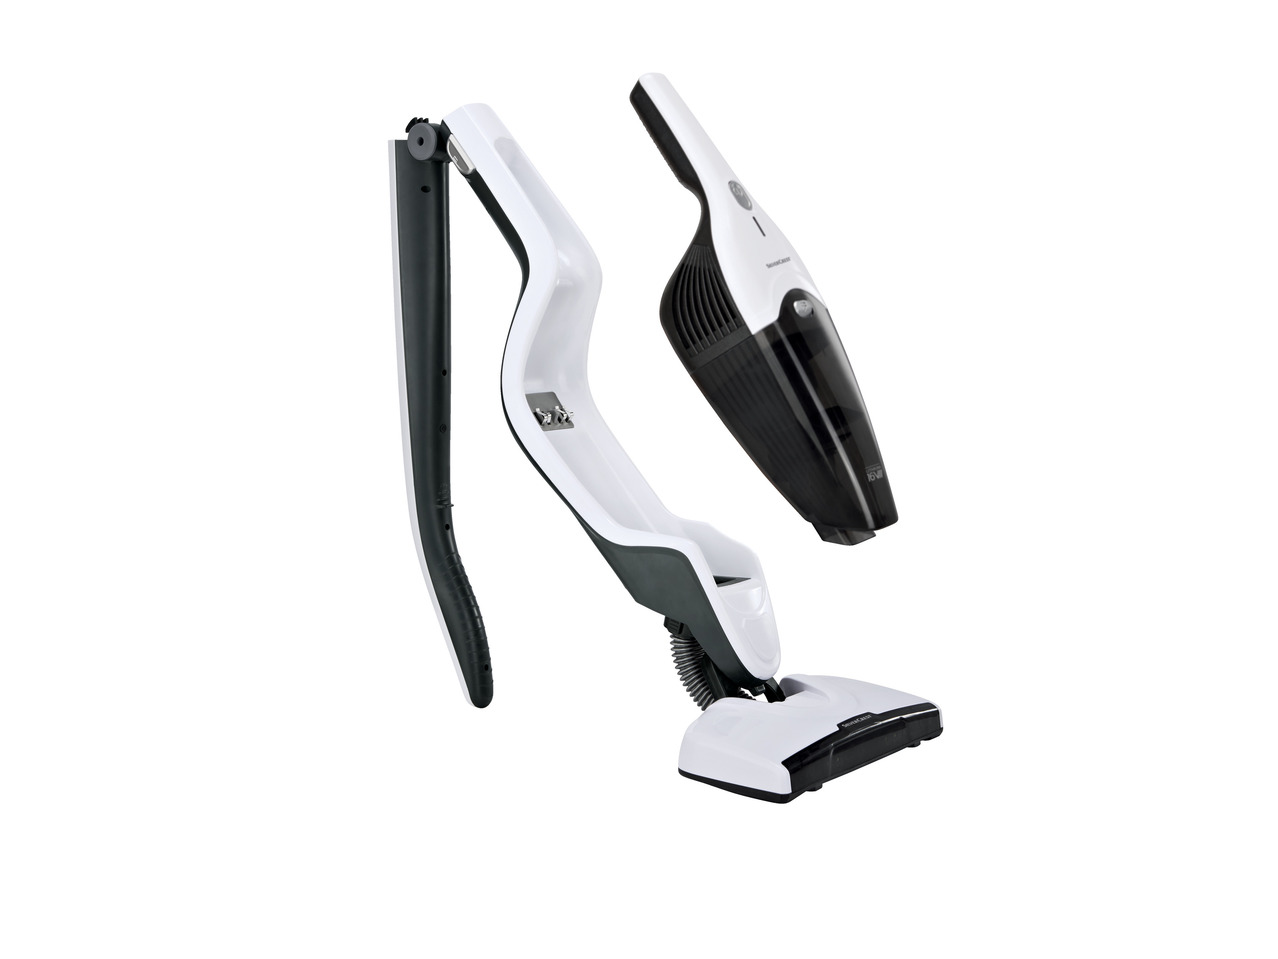 Rechargeable Hand-Held and Upright Vacuum Cleaner